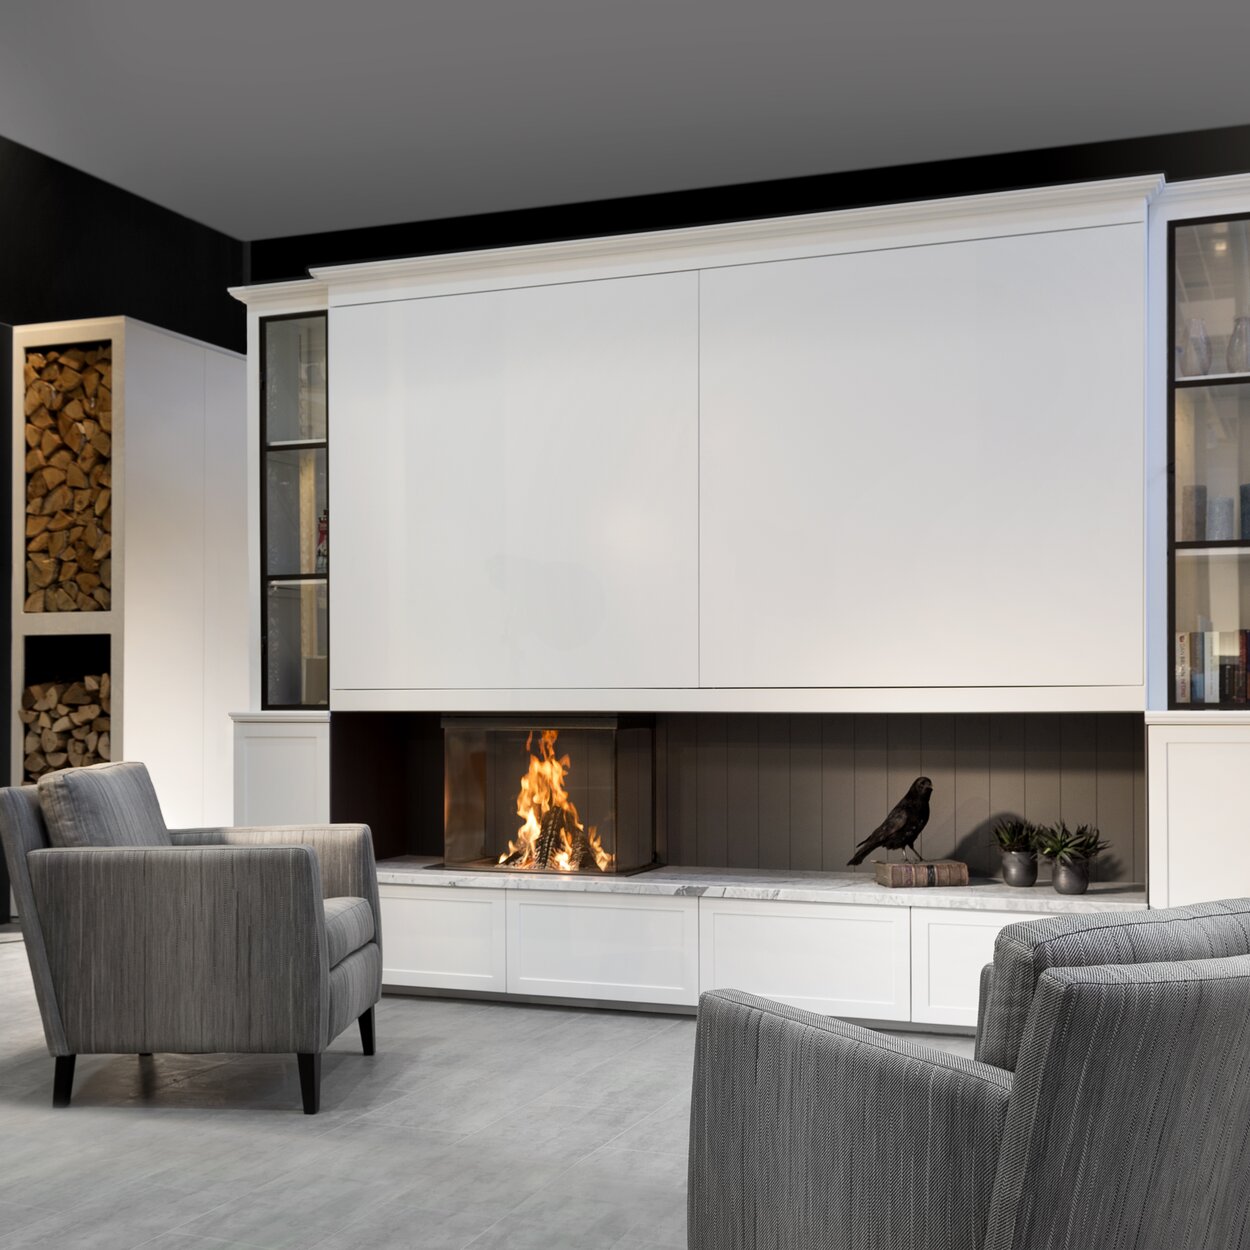 Wood fireplace W66/48S by Kalfire with 3-sided viewing panels built directly into white furniture in a lounge in grey tones